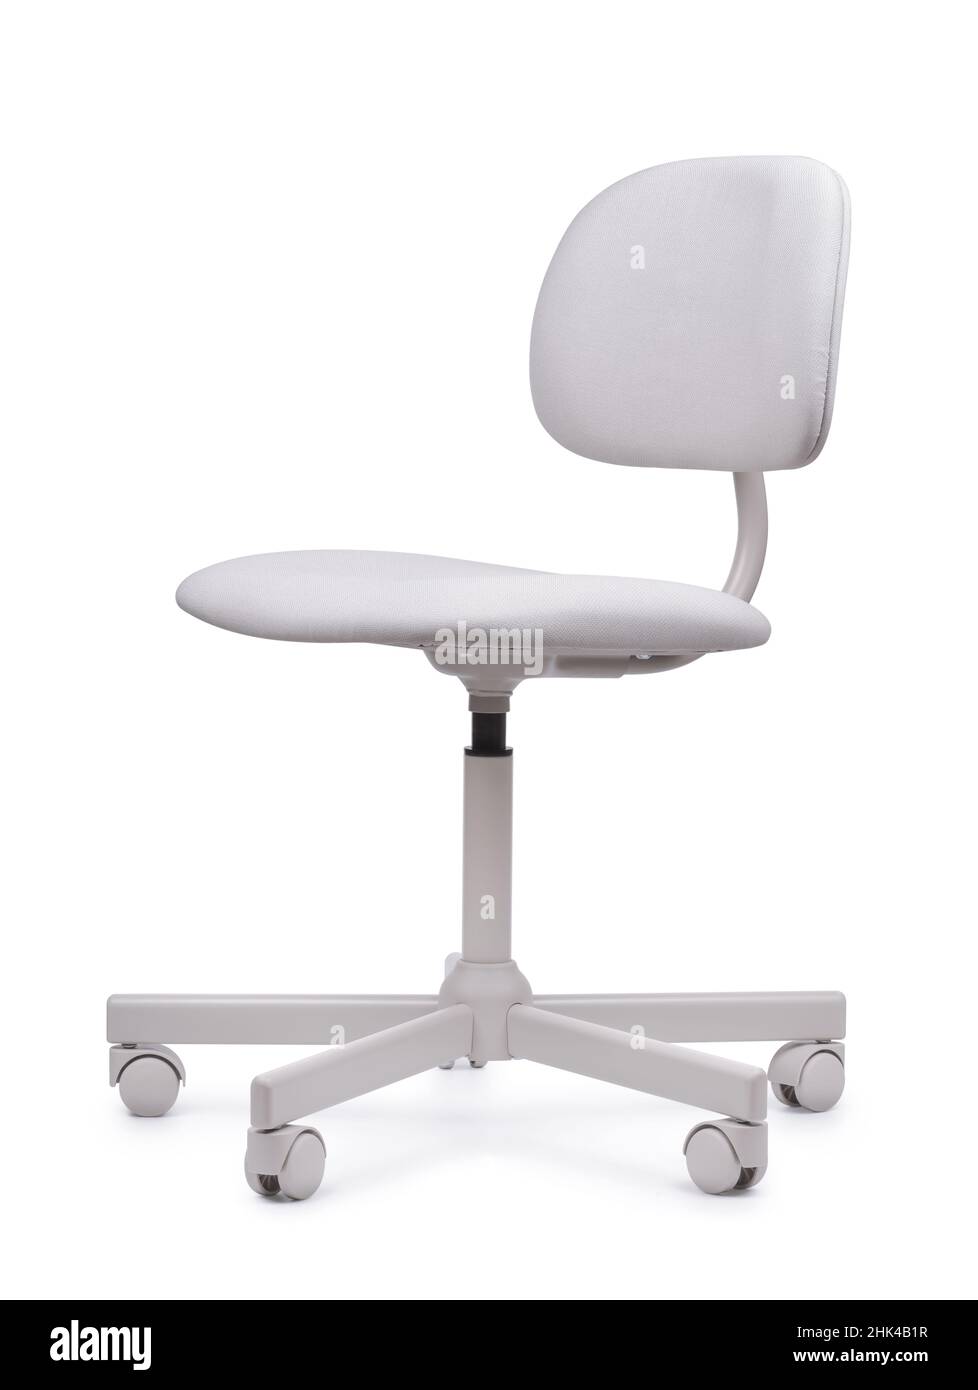 Empty white swivel task chair isolated on white Stock Photo